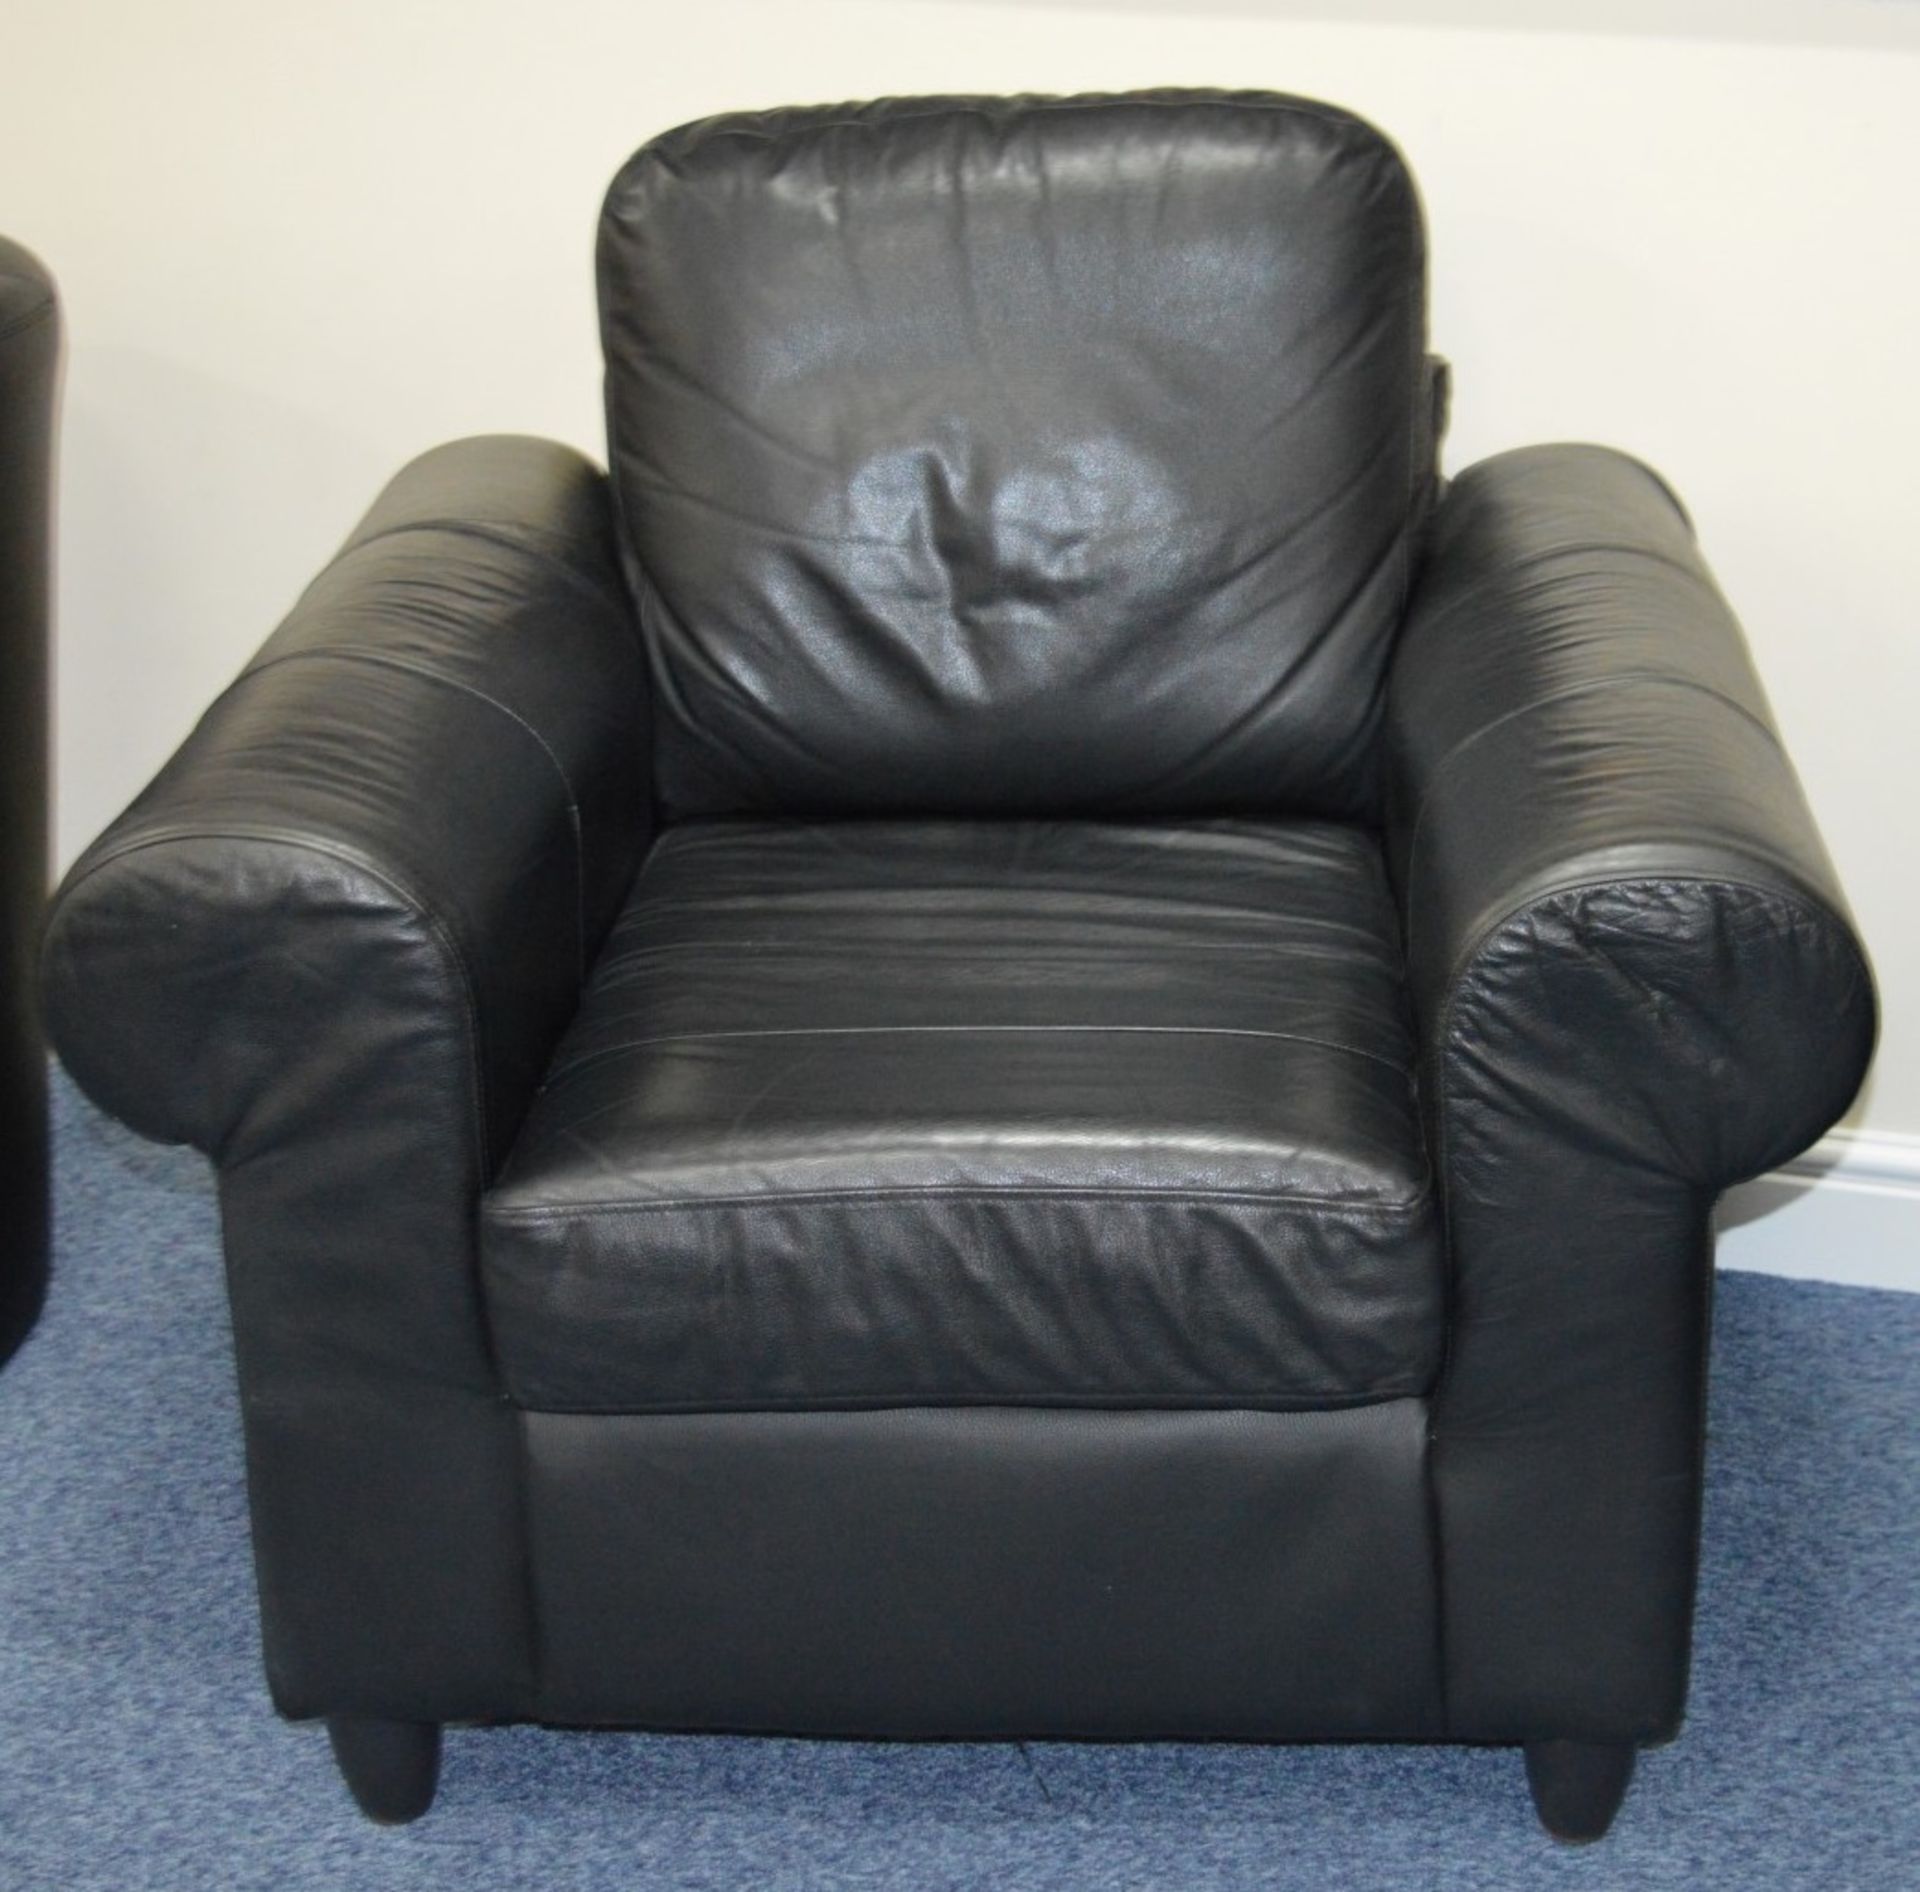 2 x Black Leather Armchairs - Contemporary Voluptuous Chairs in Black Leather - H85 x W94 x D86 - Image 2 of 5